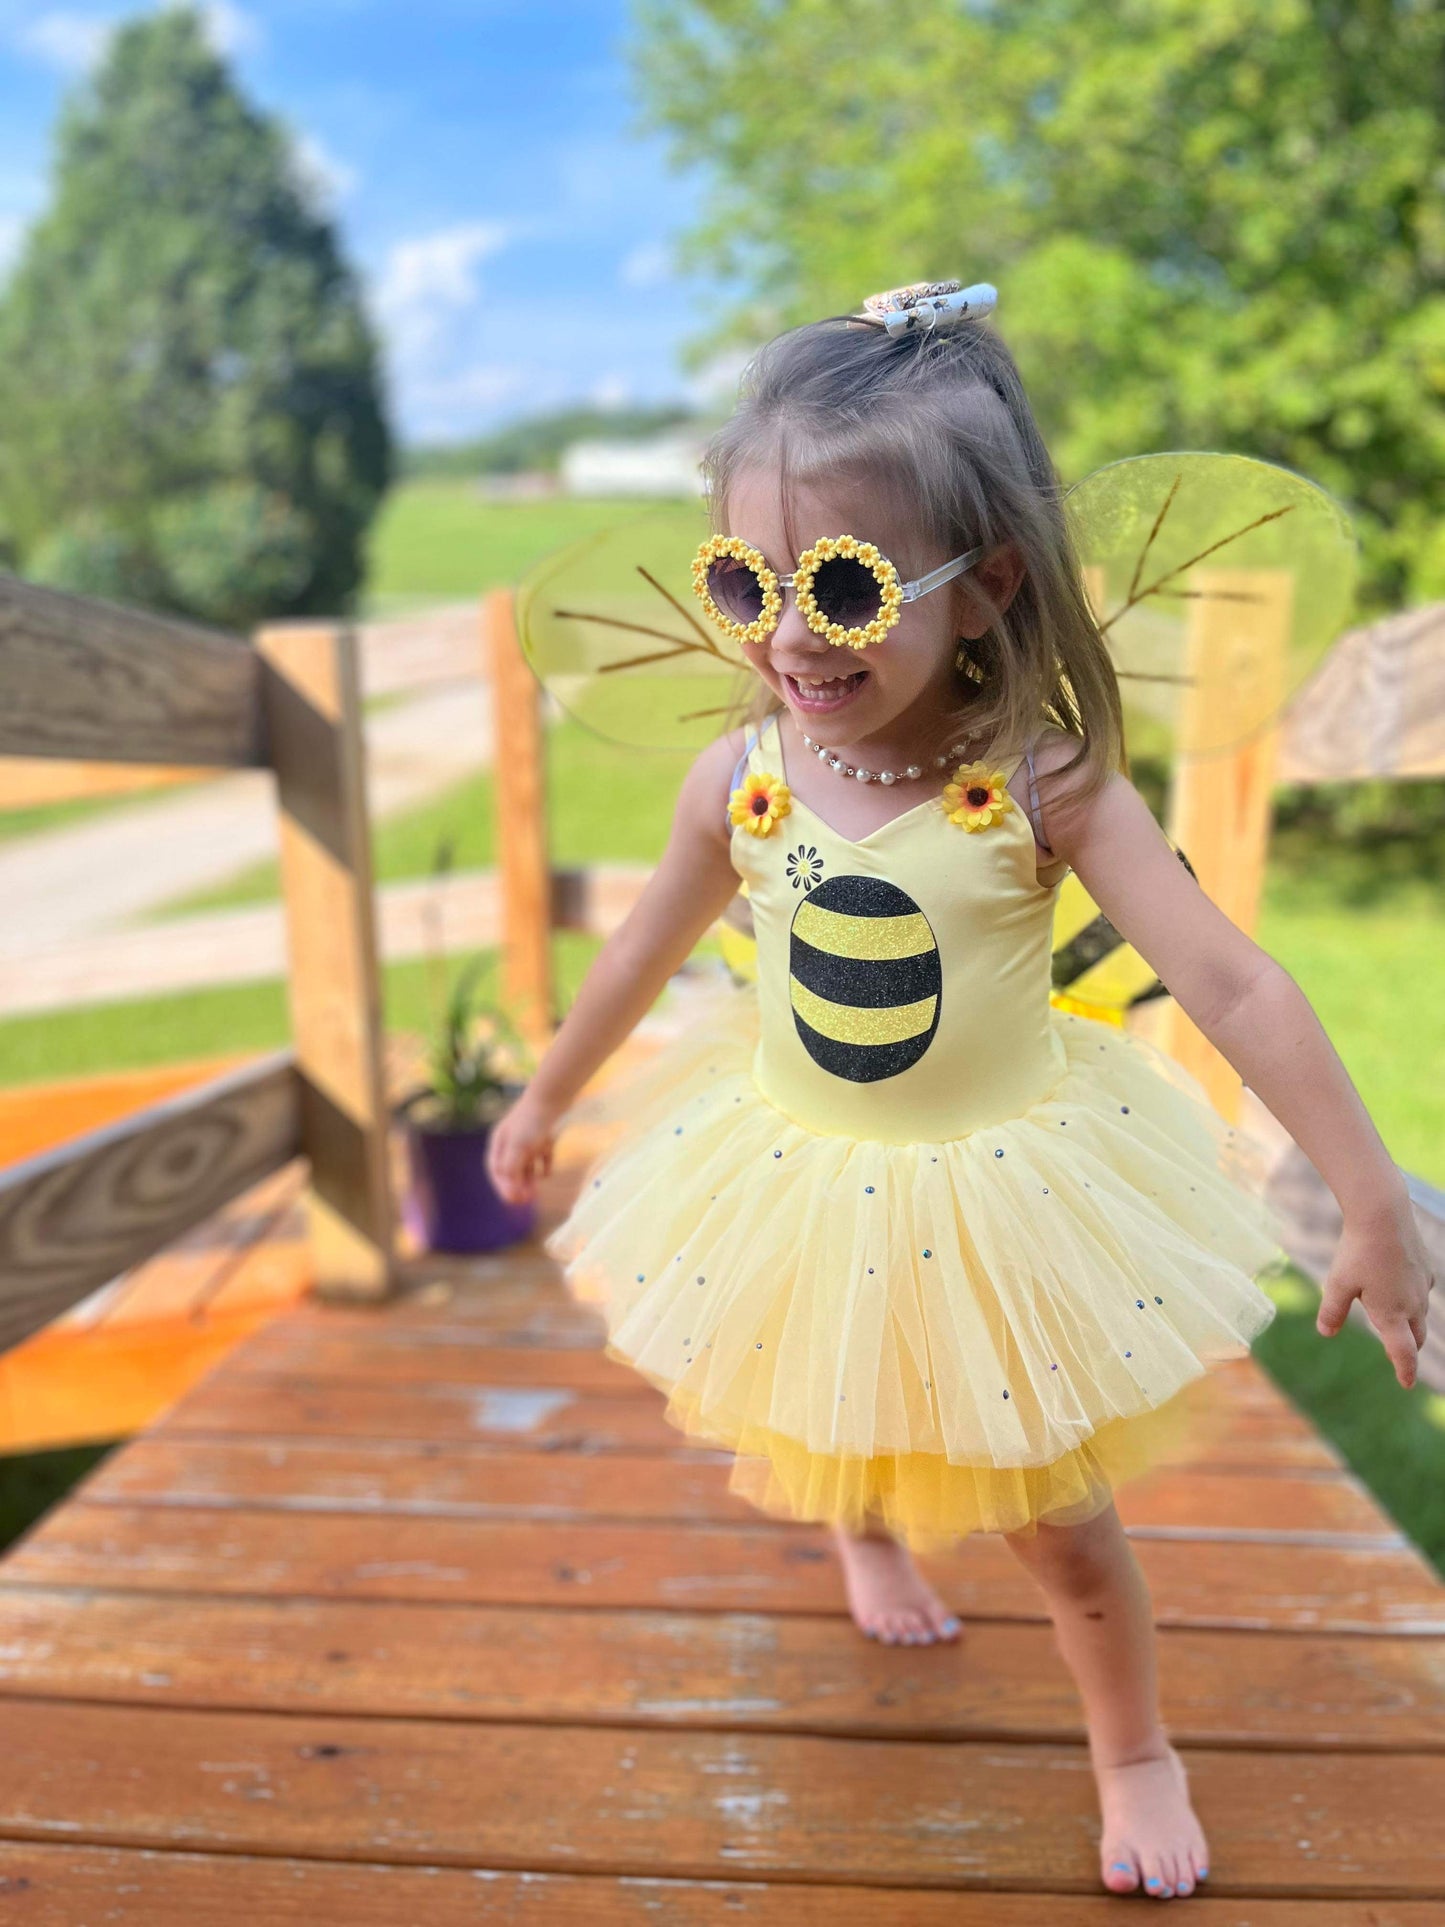 Bumble bee with wings soft tulle and rhinestones TWO PIECE BAMBOO SET